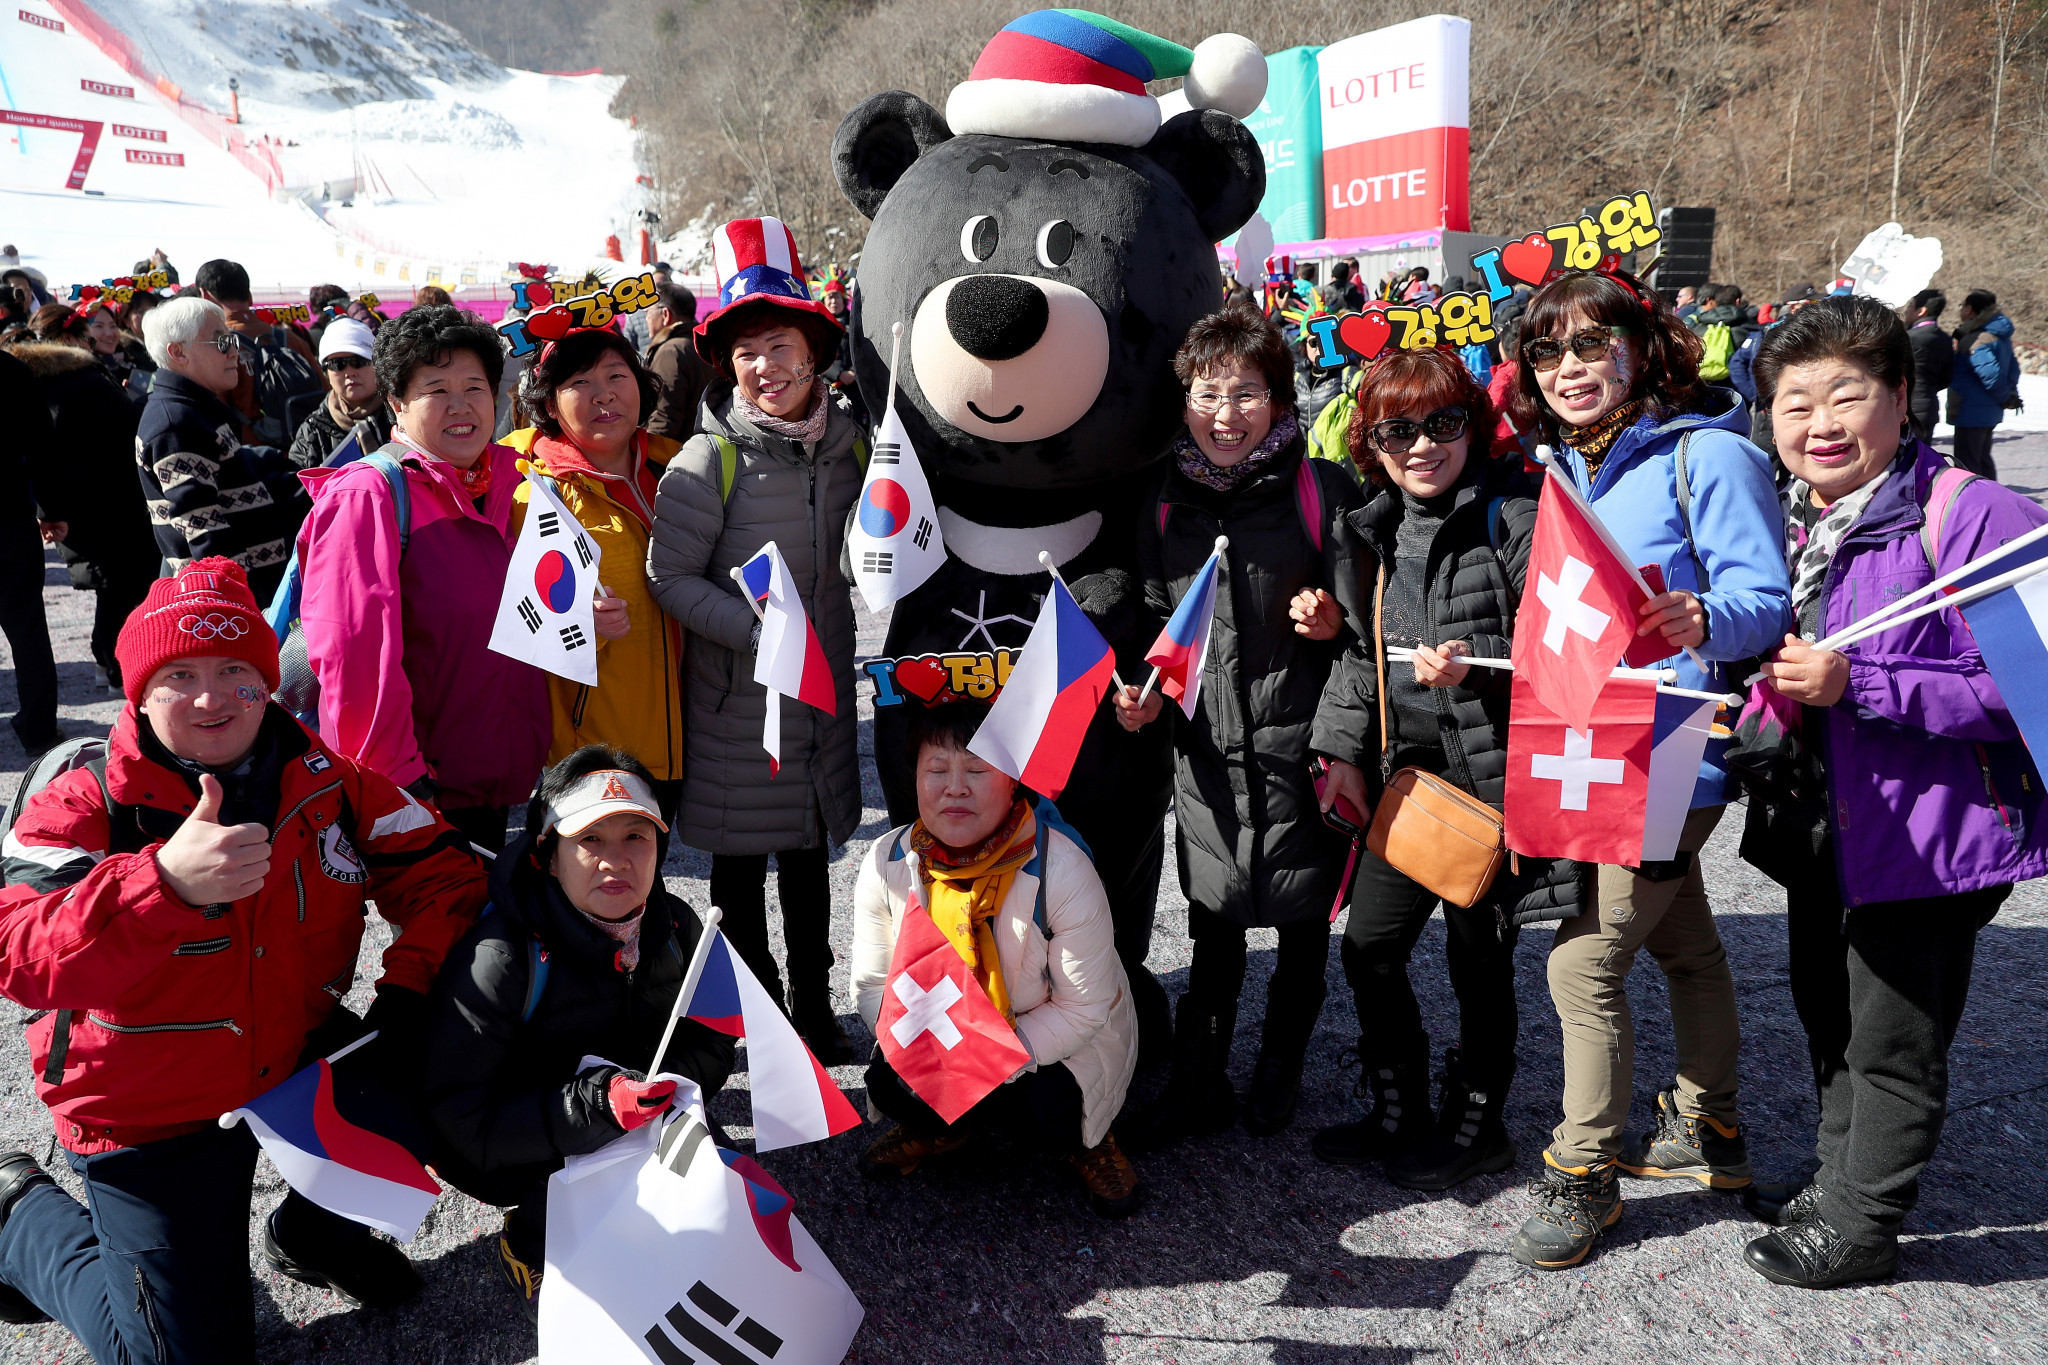 Pyeongchang 2018 visitors given option of extended South Korea stays